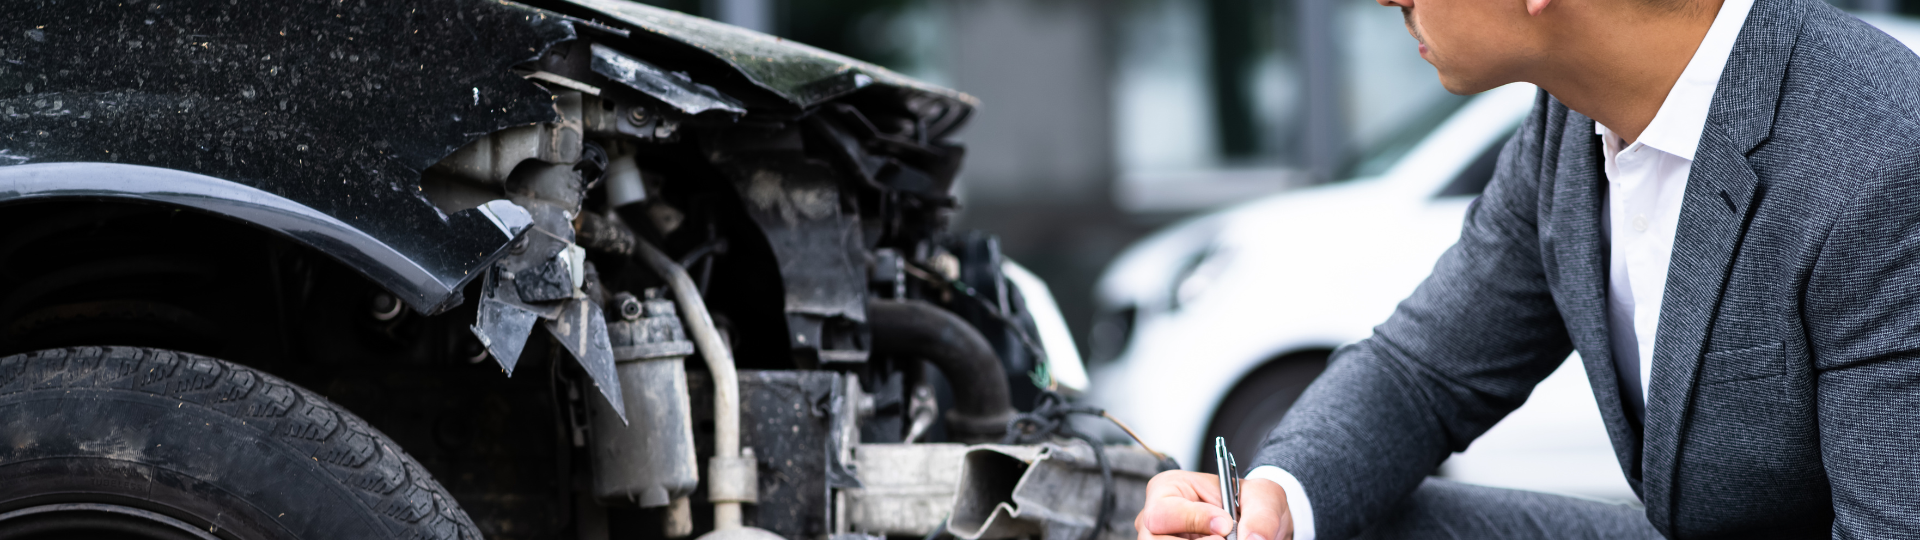 What Constitutes ‘Proper Search And Inquiry” After a Motor Vehicle Accident?